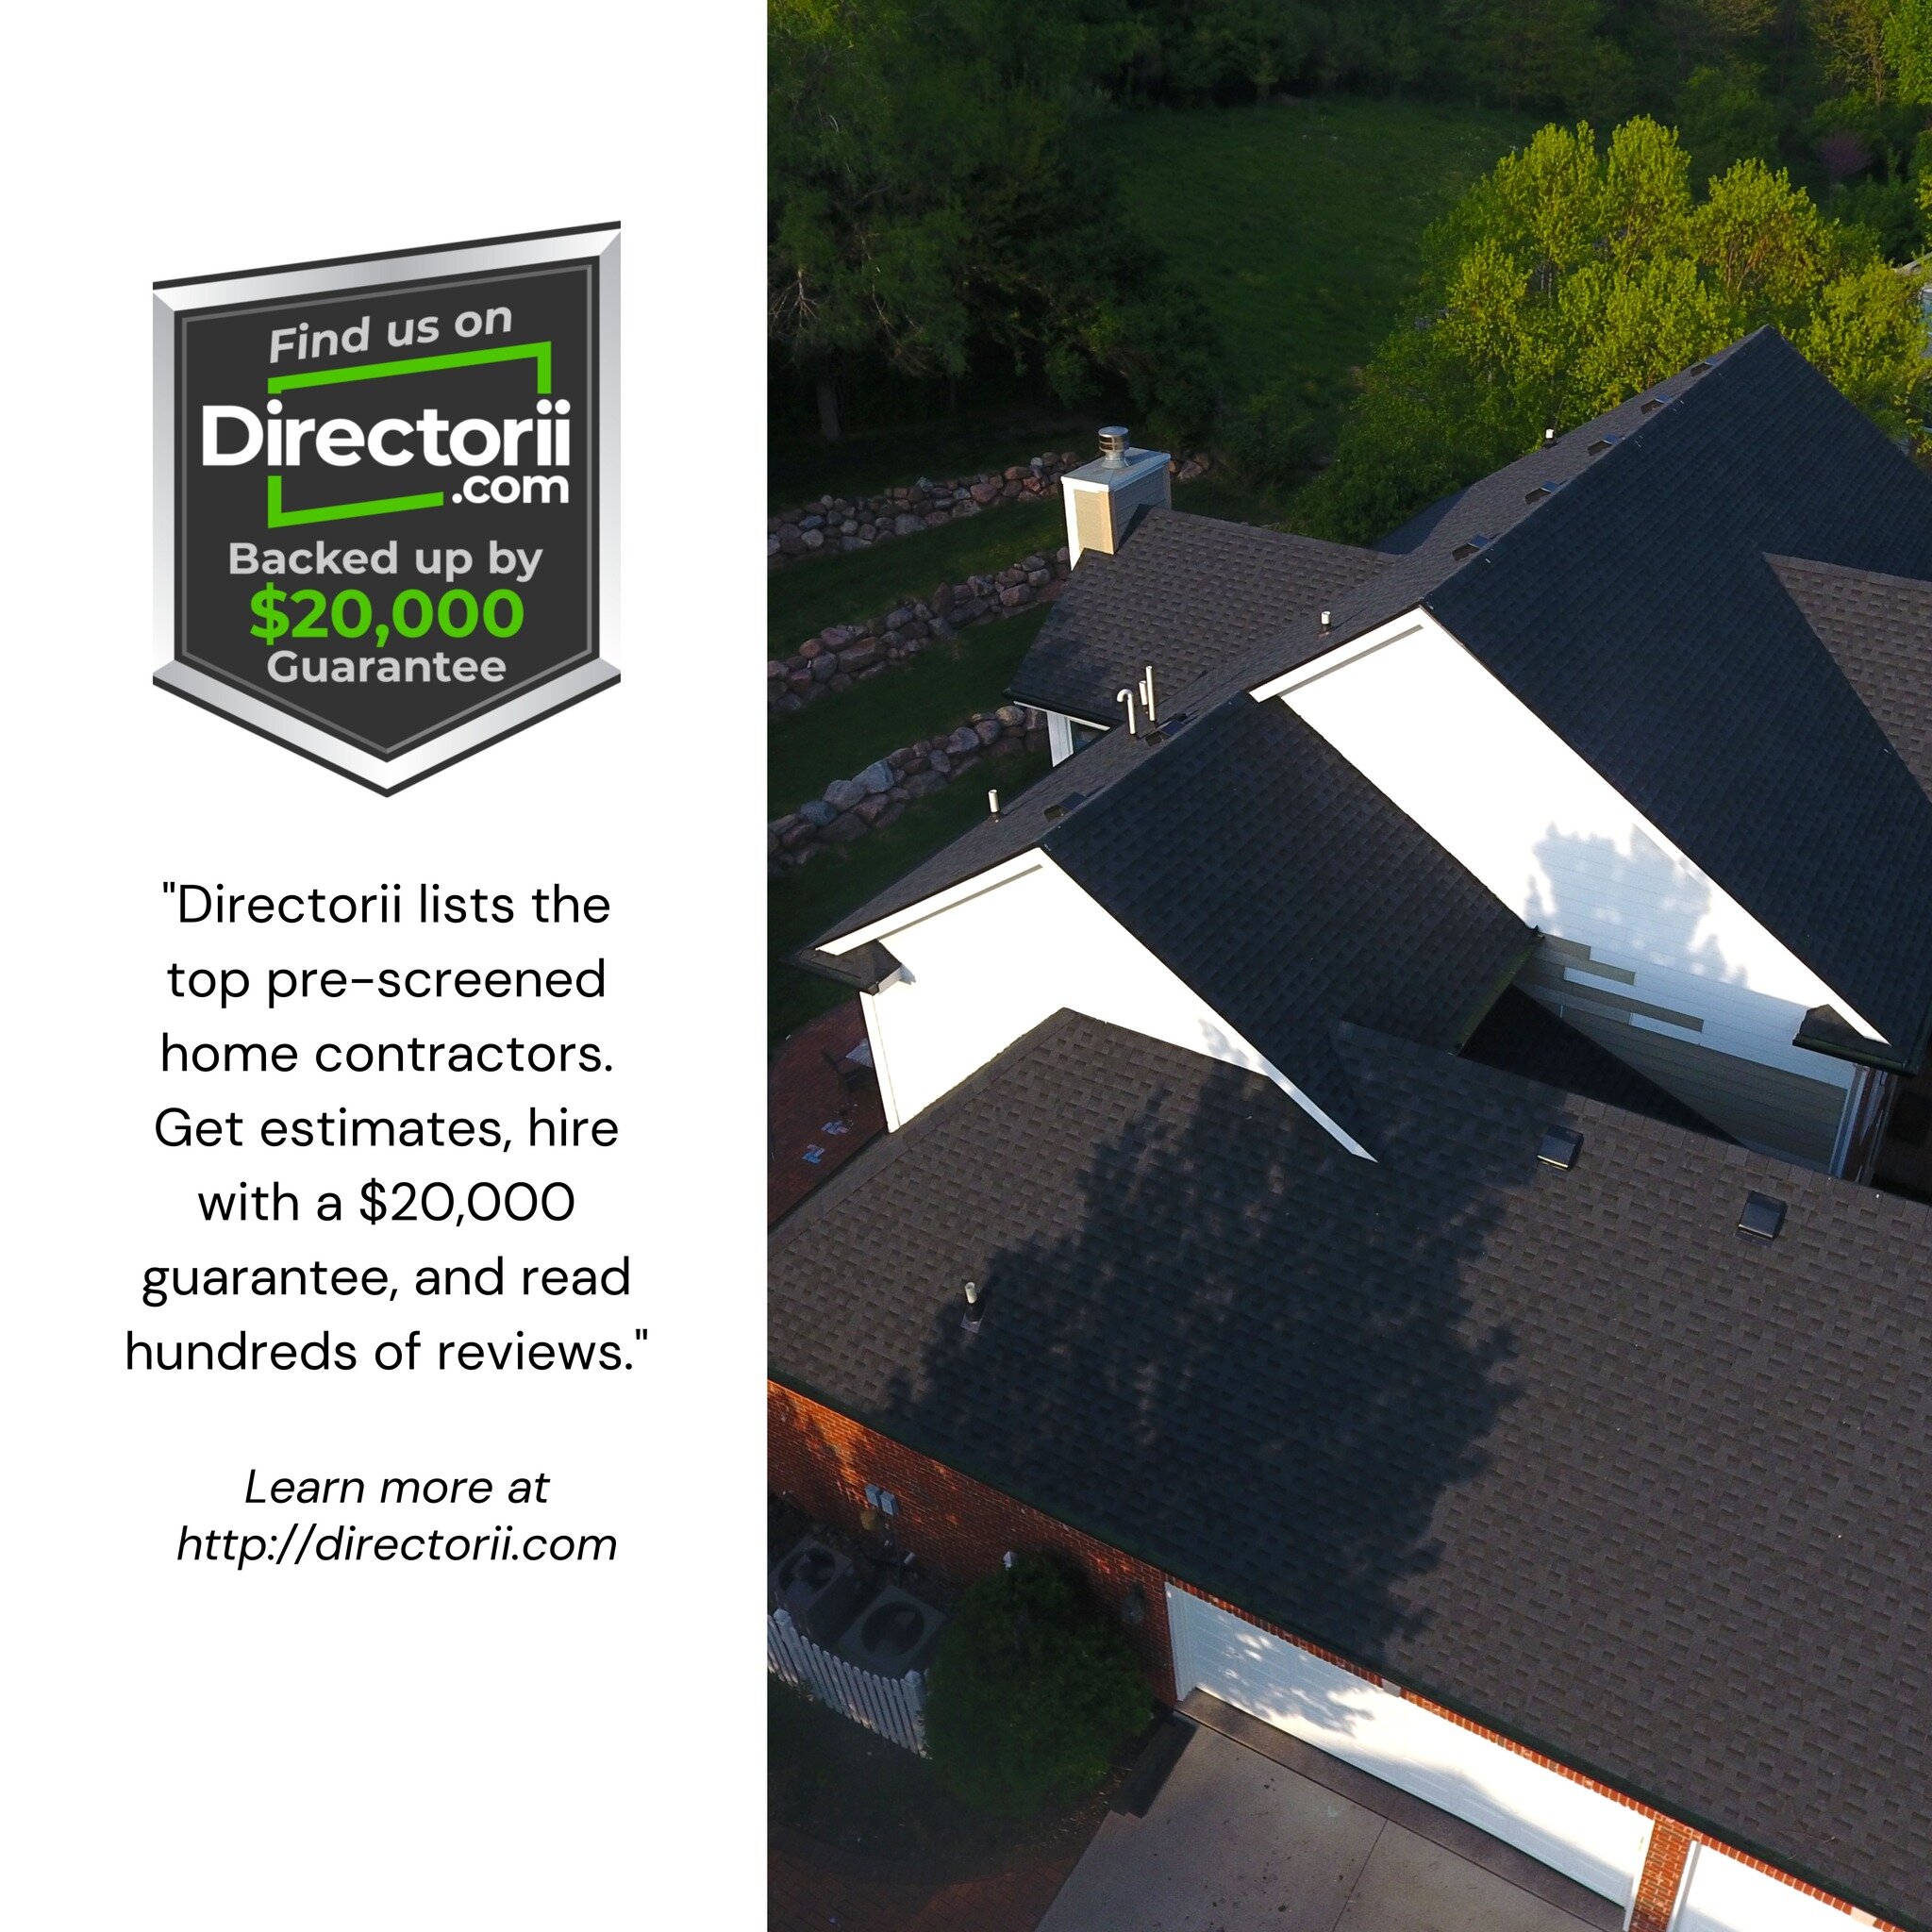 Exciting news! Our company has been featured on Directorii.com, the premier online directory of trusted businesses. And the best part? 

We now offer the Directorii Guarantee, providing up to $20,000 of protection. Trust us to deliver the highest lev